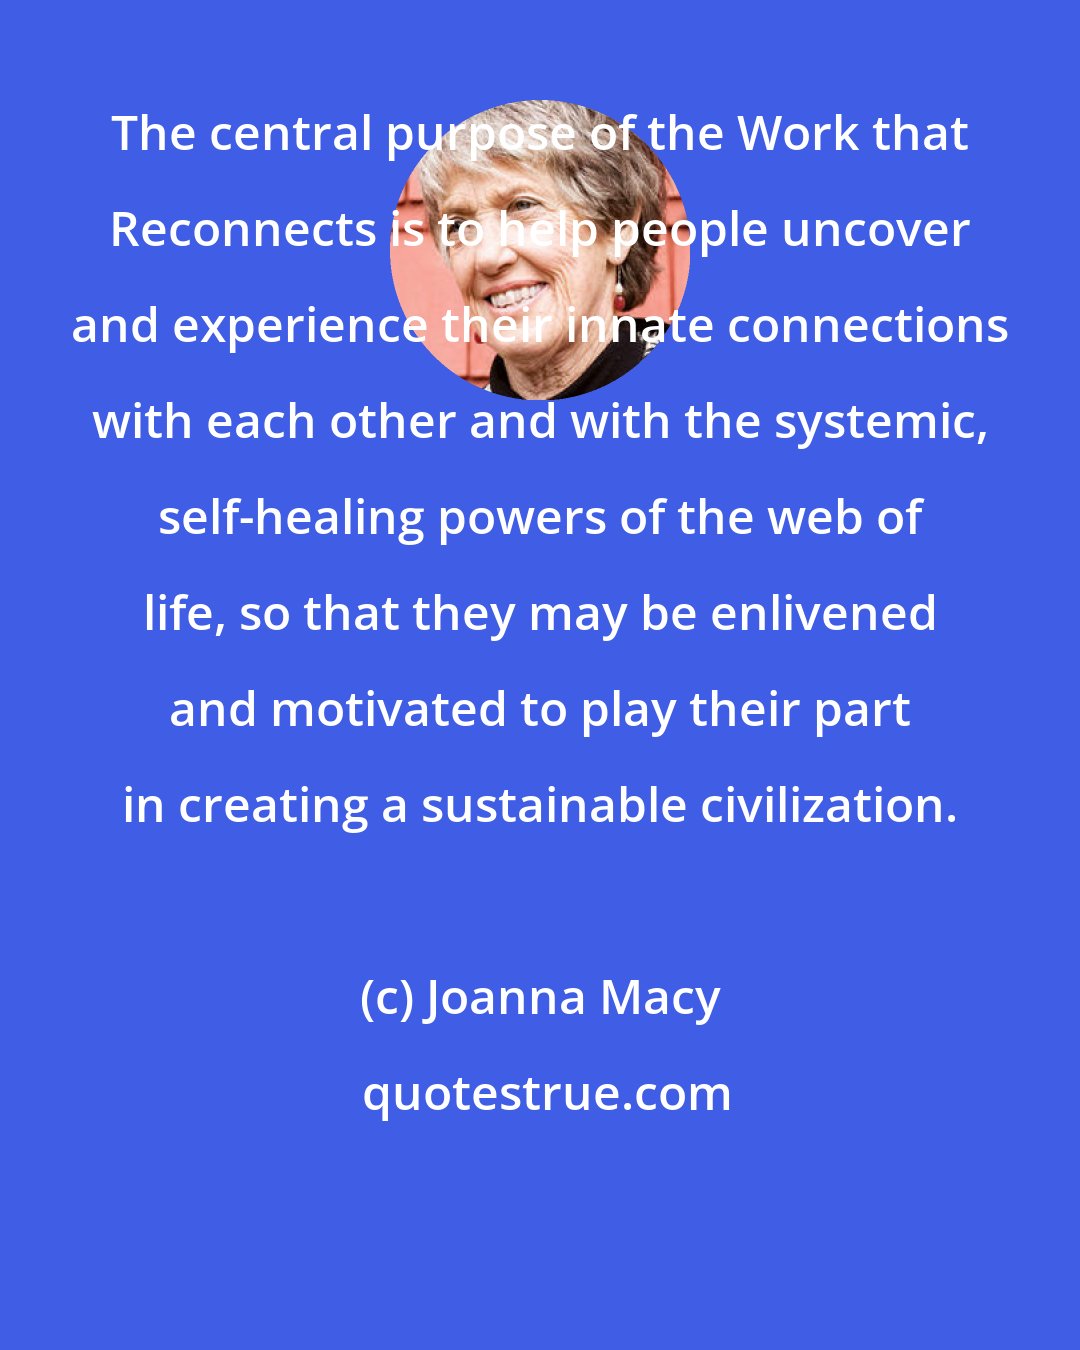 Joanna Macy: The central purpose of the Work that Reconnects is to help people uncover and experience their innate connections with each other and with the systemic, self-healing powers of the web of life, so that they may be enlivened and motivated to play their part in creating a sustainable civilization.